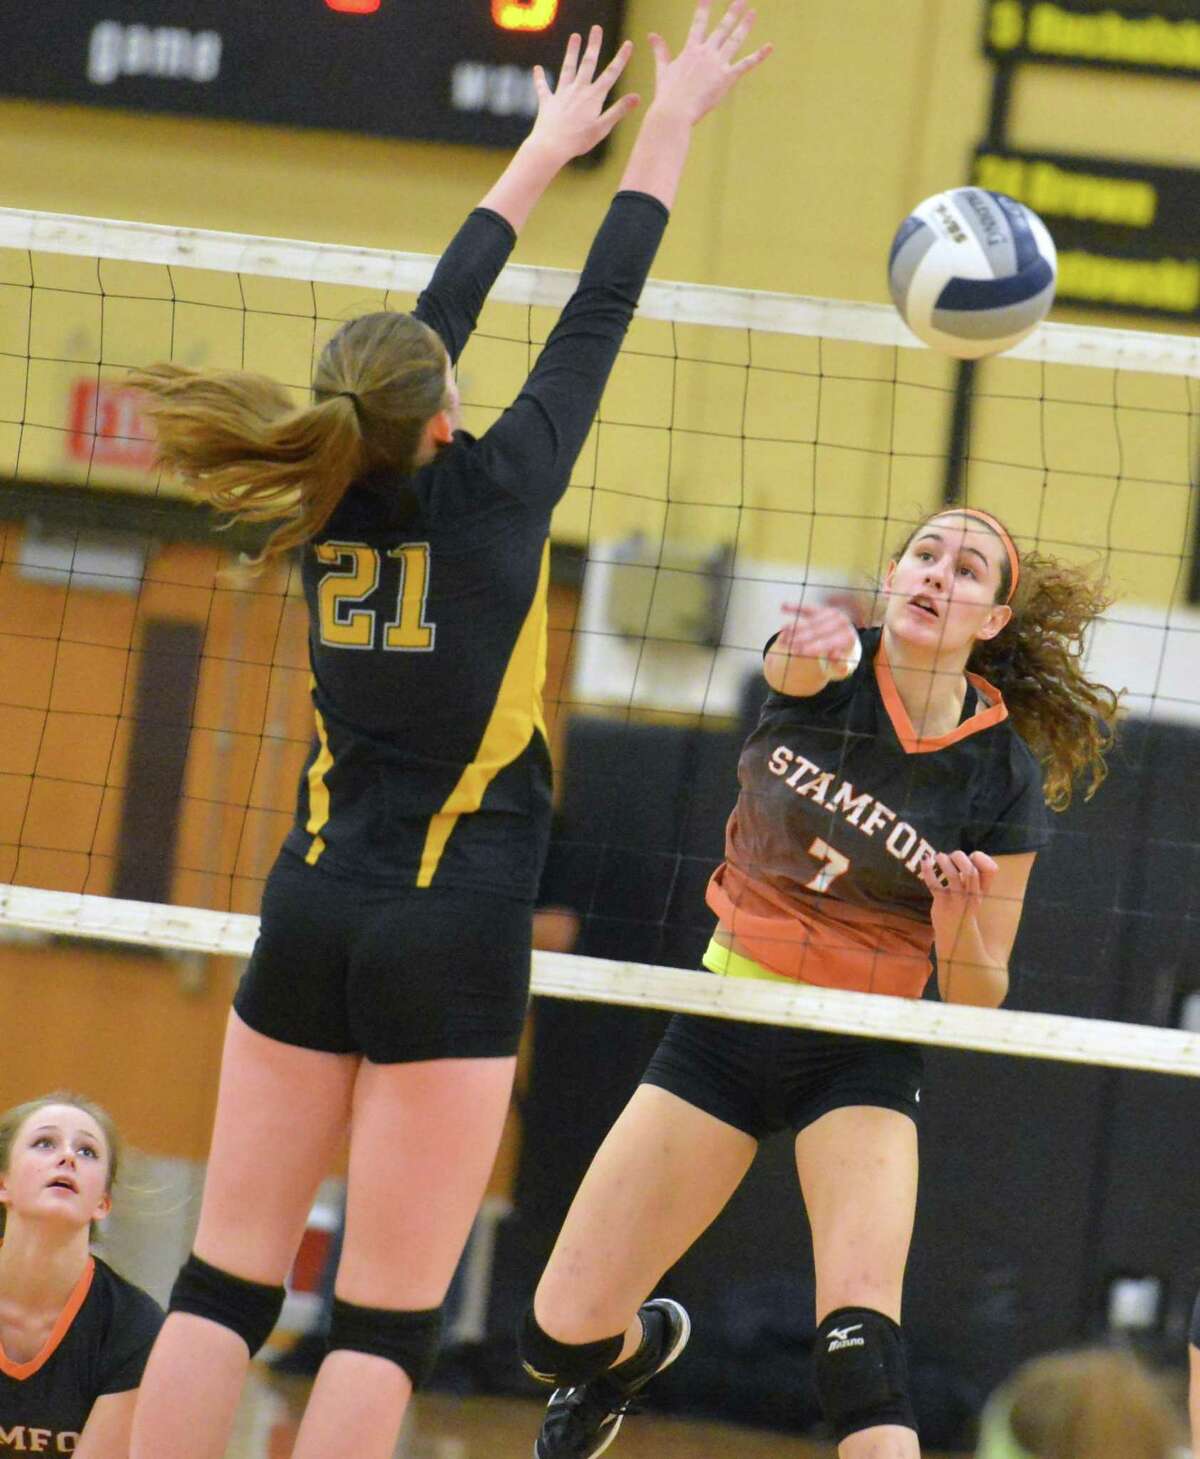 Stamford’s Andrea O’Connor sends the ball past Amity’s Abagail Harbinson during Wednesday’s Class LL semifinal at Trumbull. The Black Knights won 3-0.